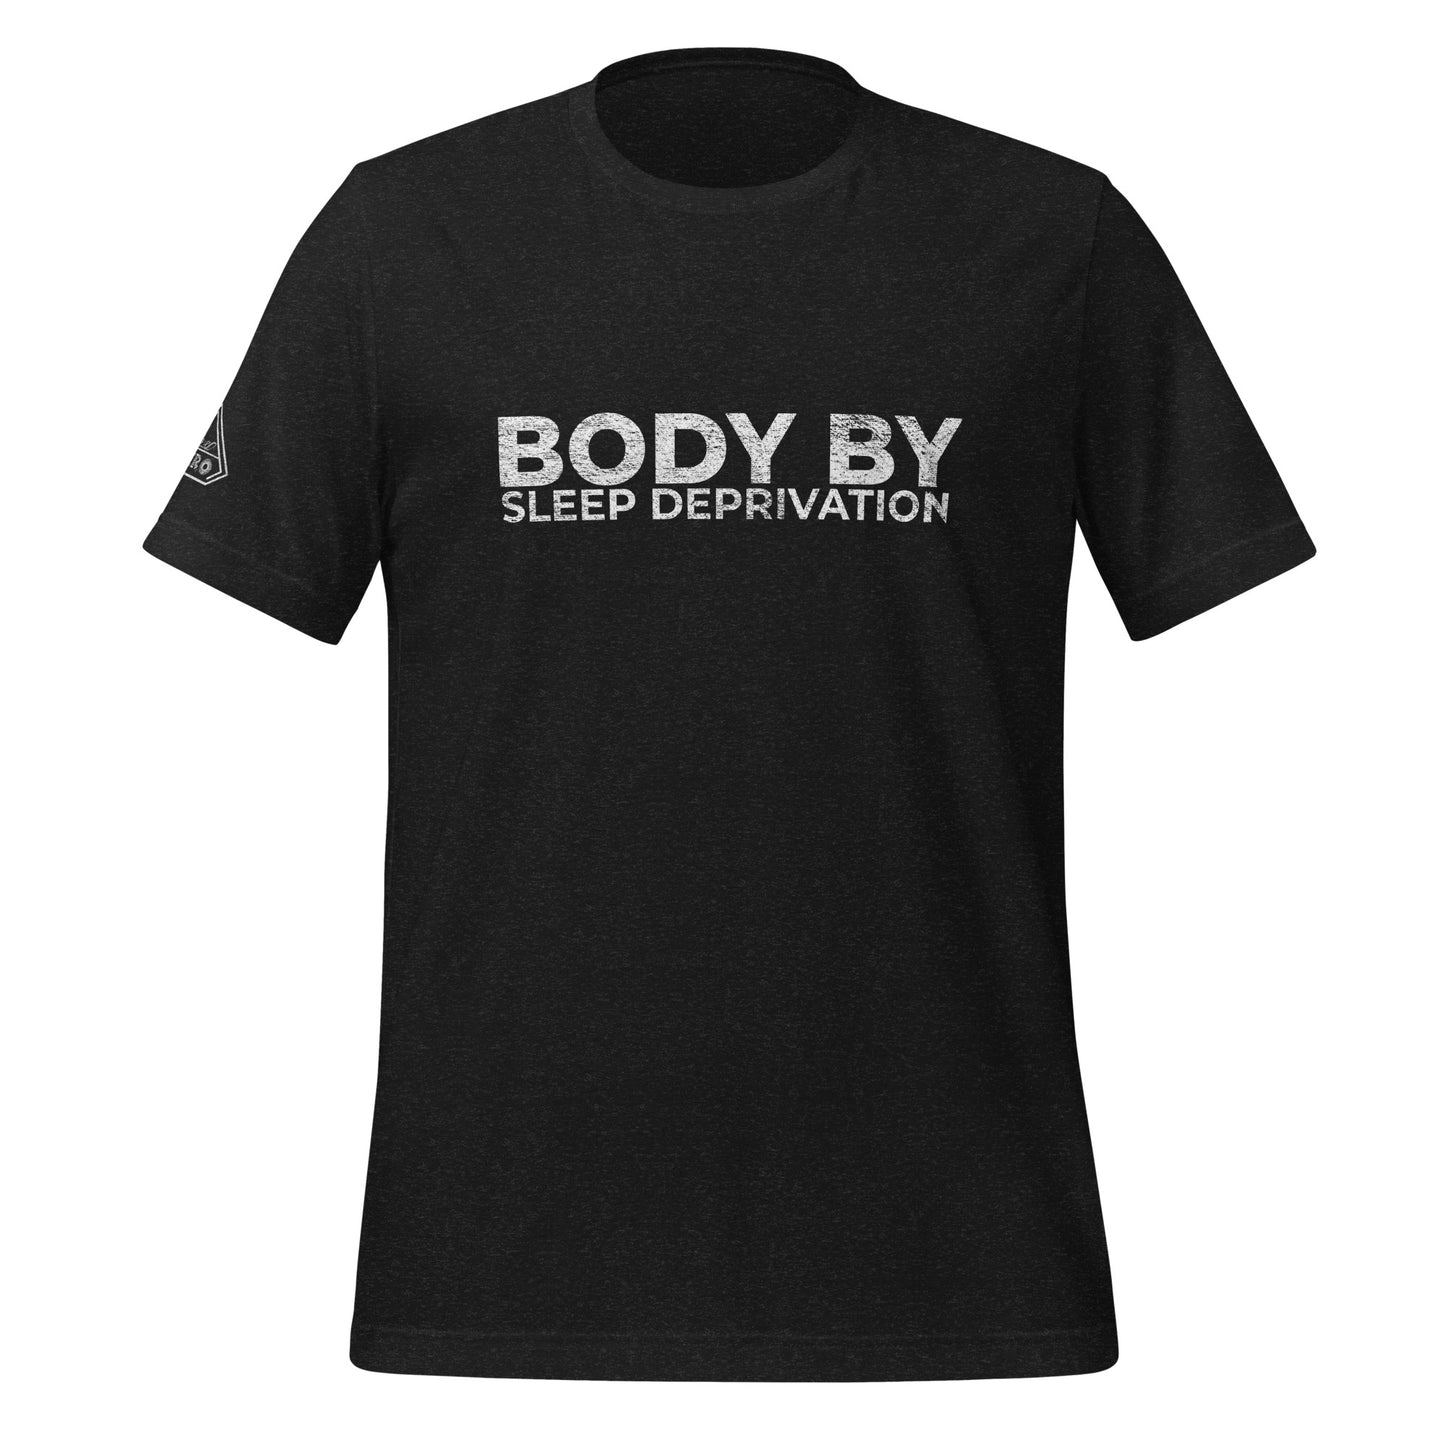 BODY BY SLEEP DEPRIVATION, Graphic Tee Shirt, Black